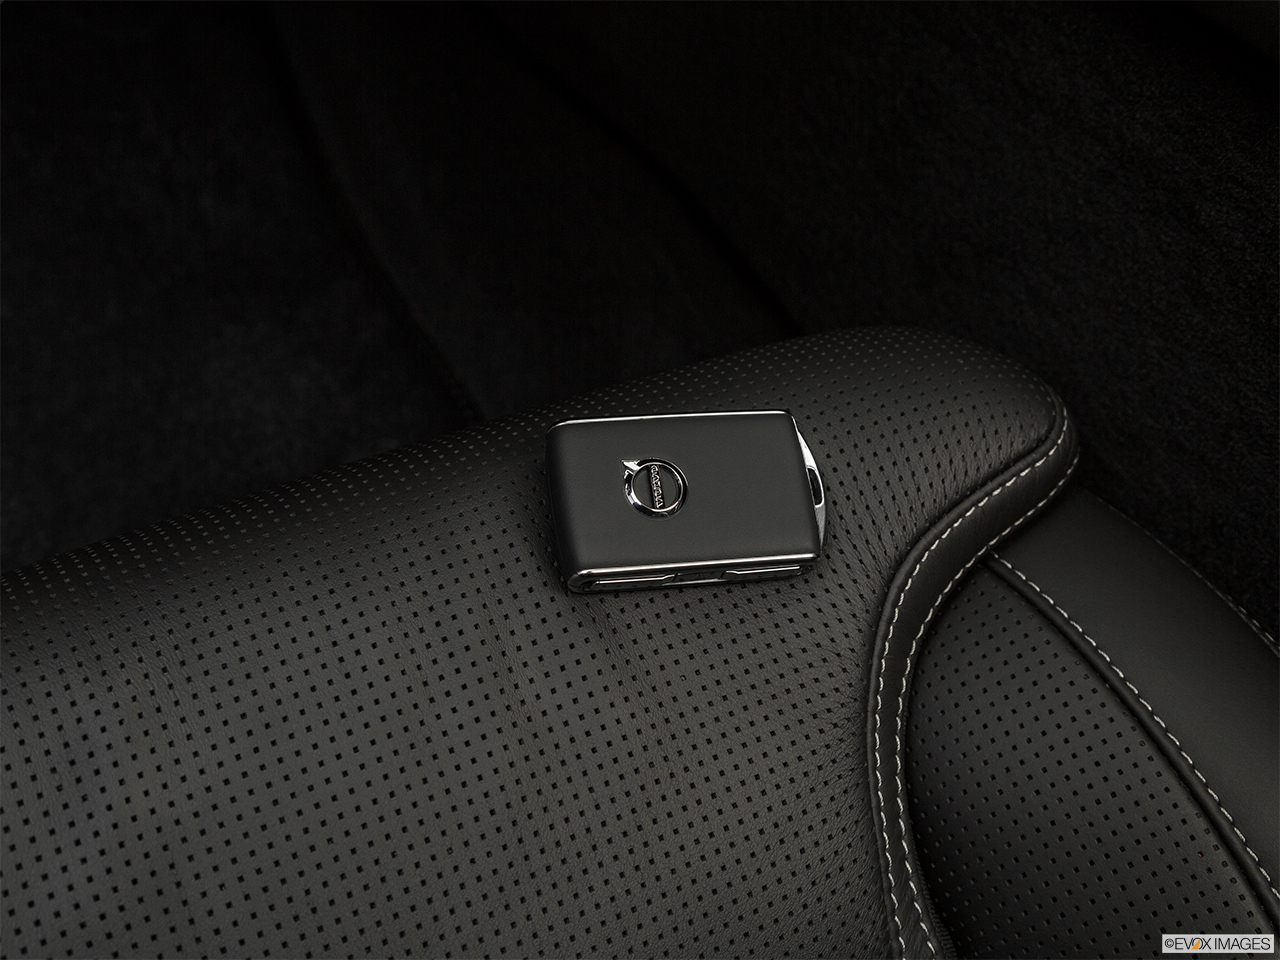 2020 Volvo S90 T6 Inscription Key fob on driver's seat. 